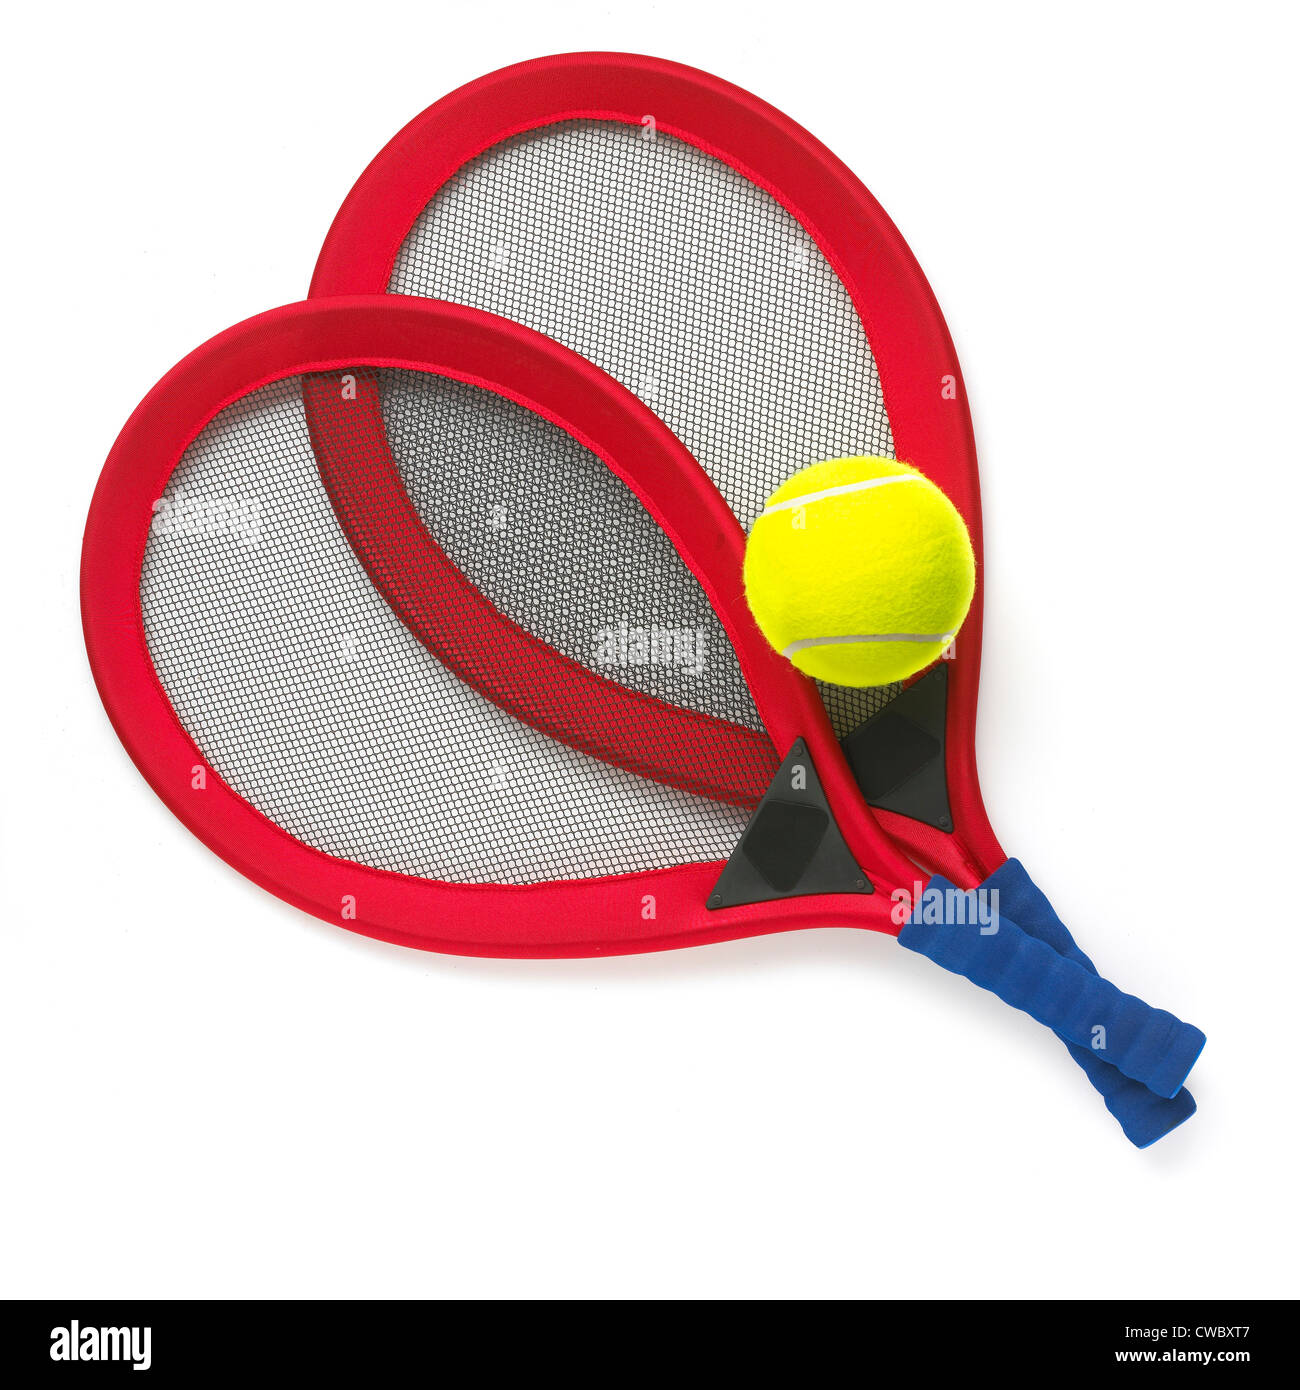 Two beach tennis rackets with ball Stock Photo